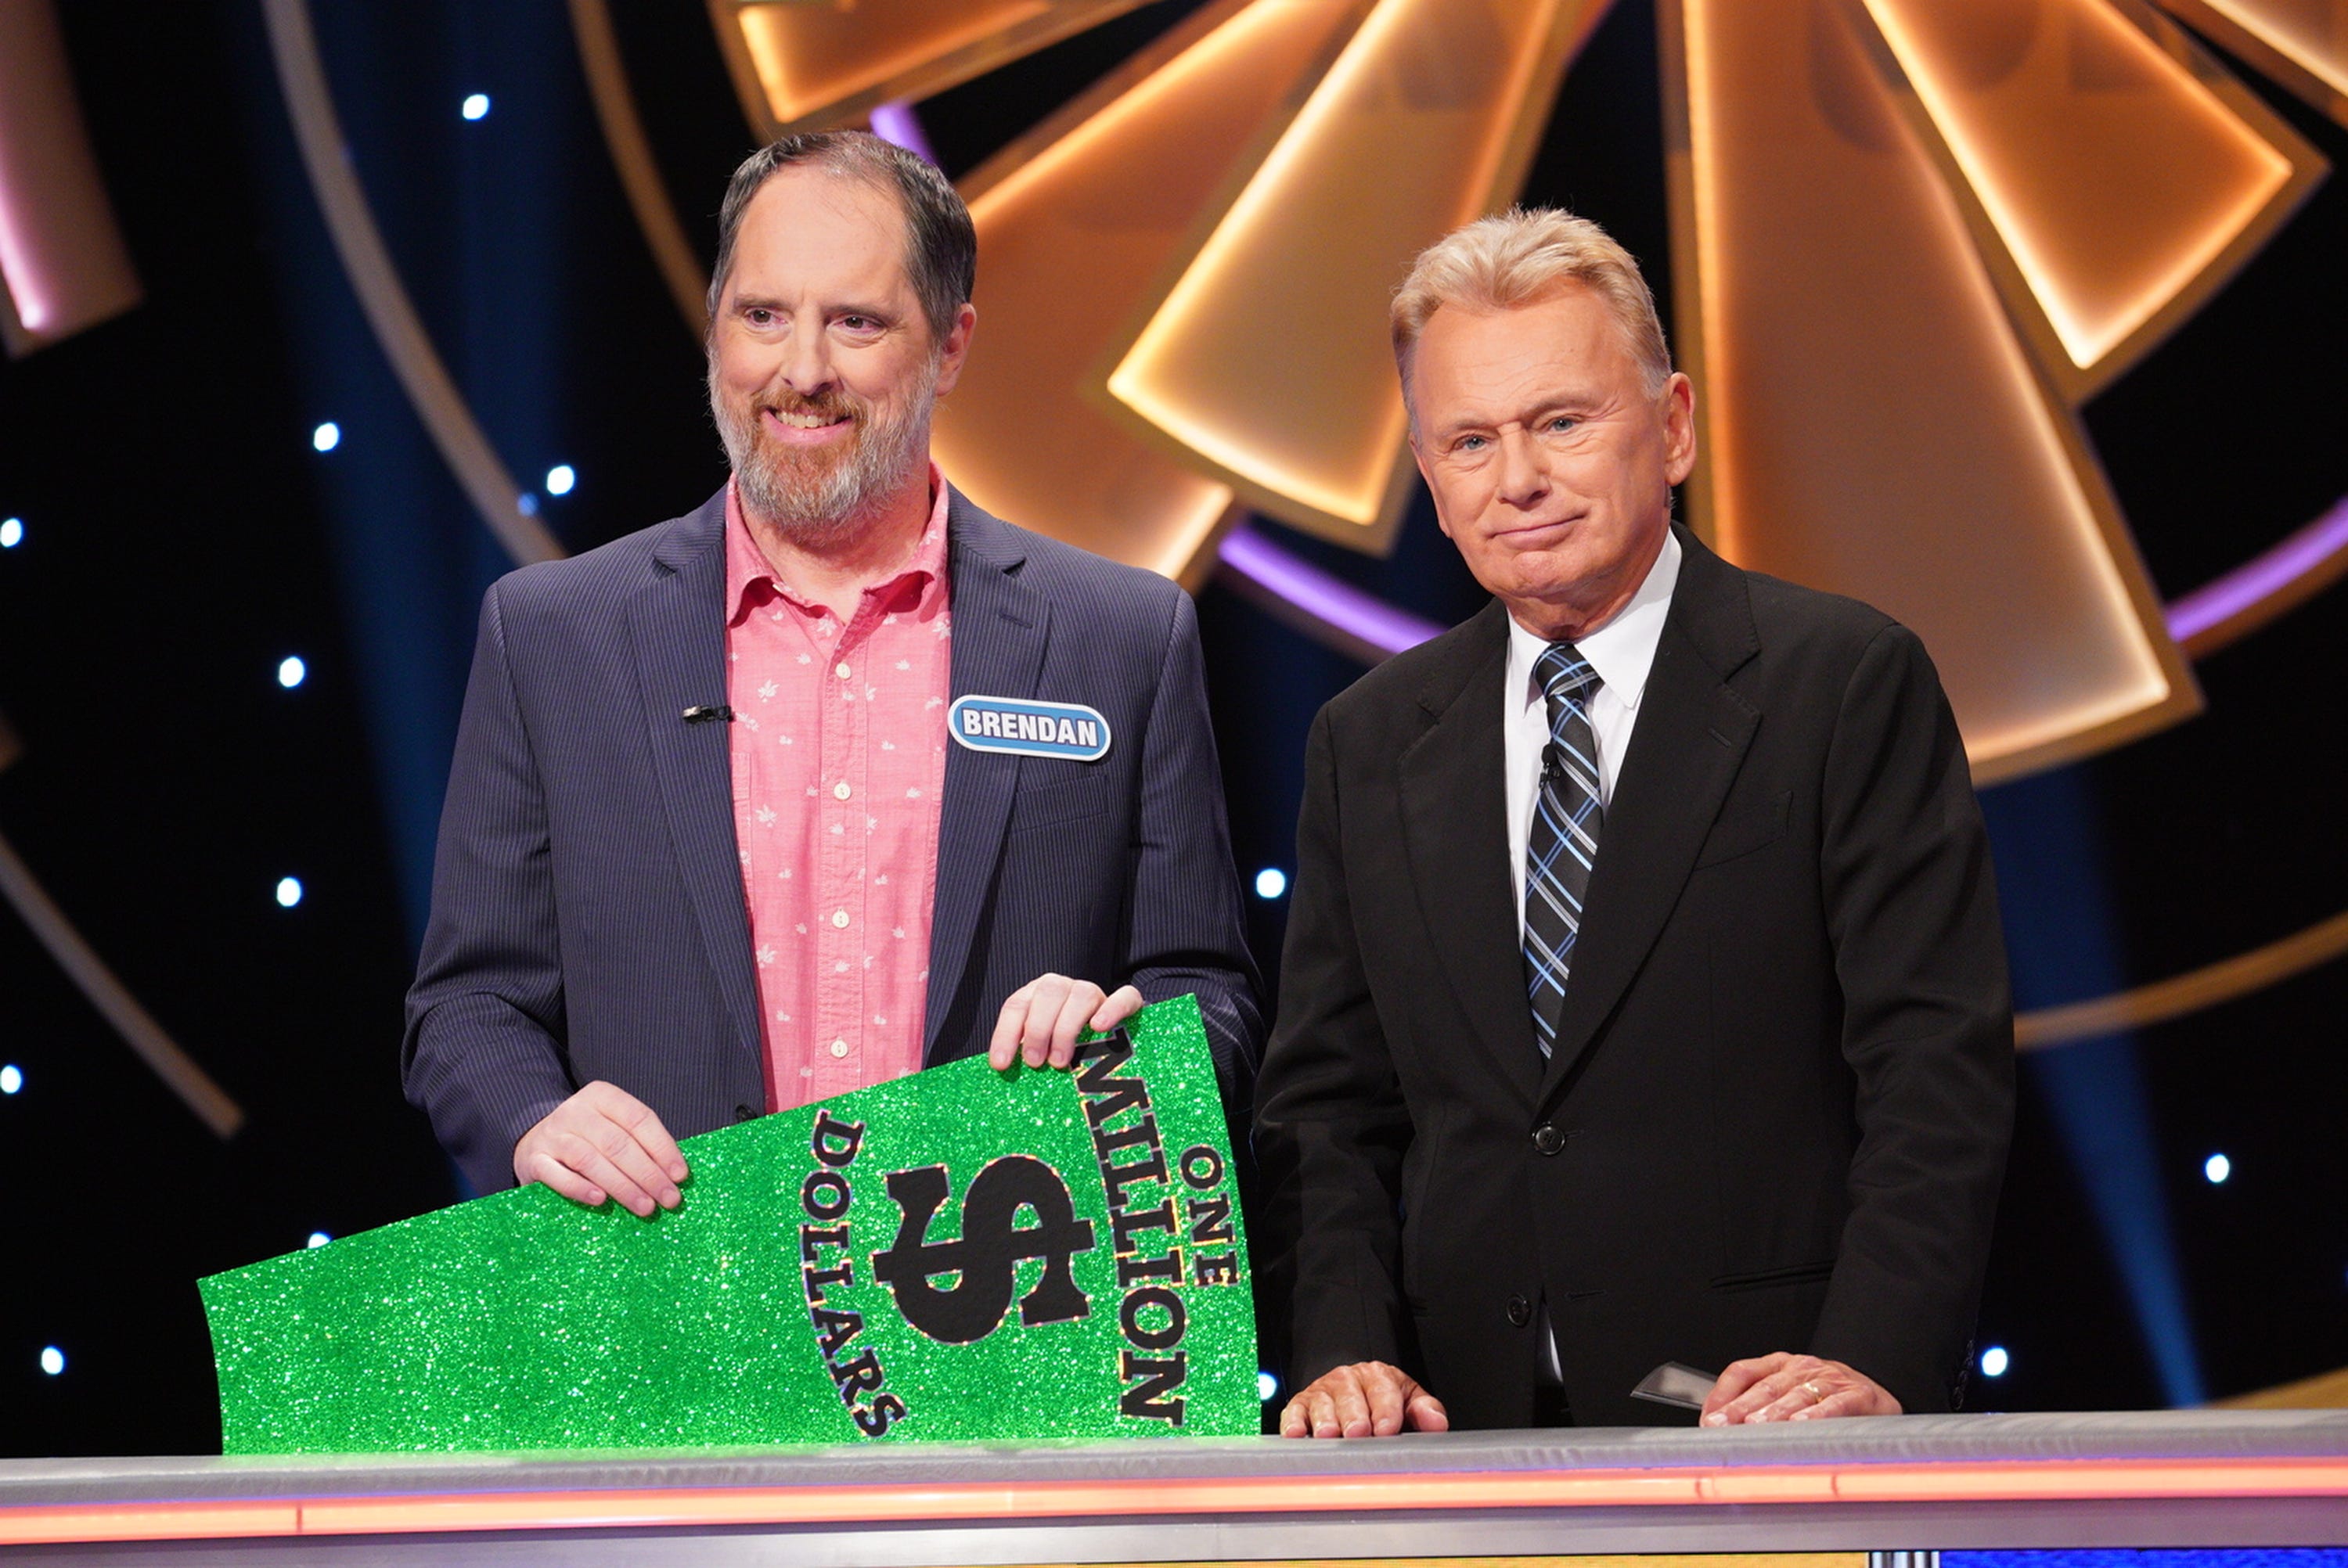 'Wheel of Fortune' Host Pat Sajak Had the Best Response to a Contestant's Mistake